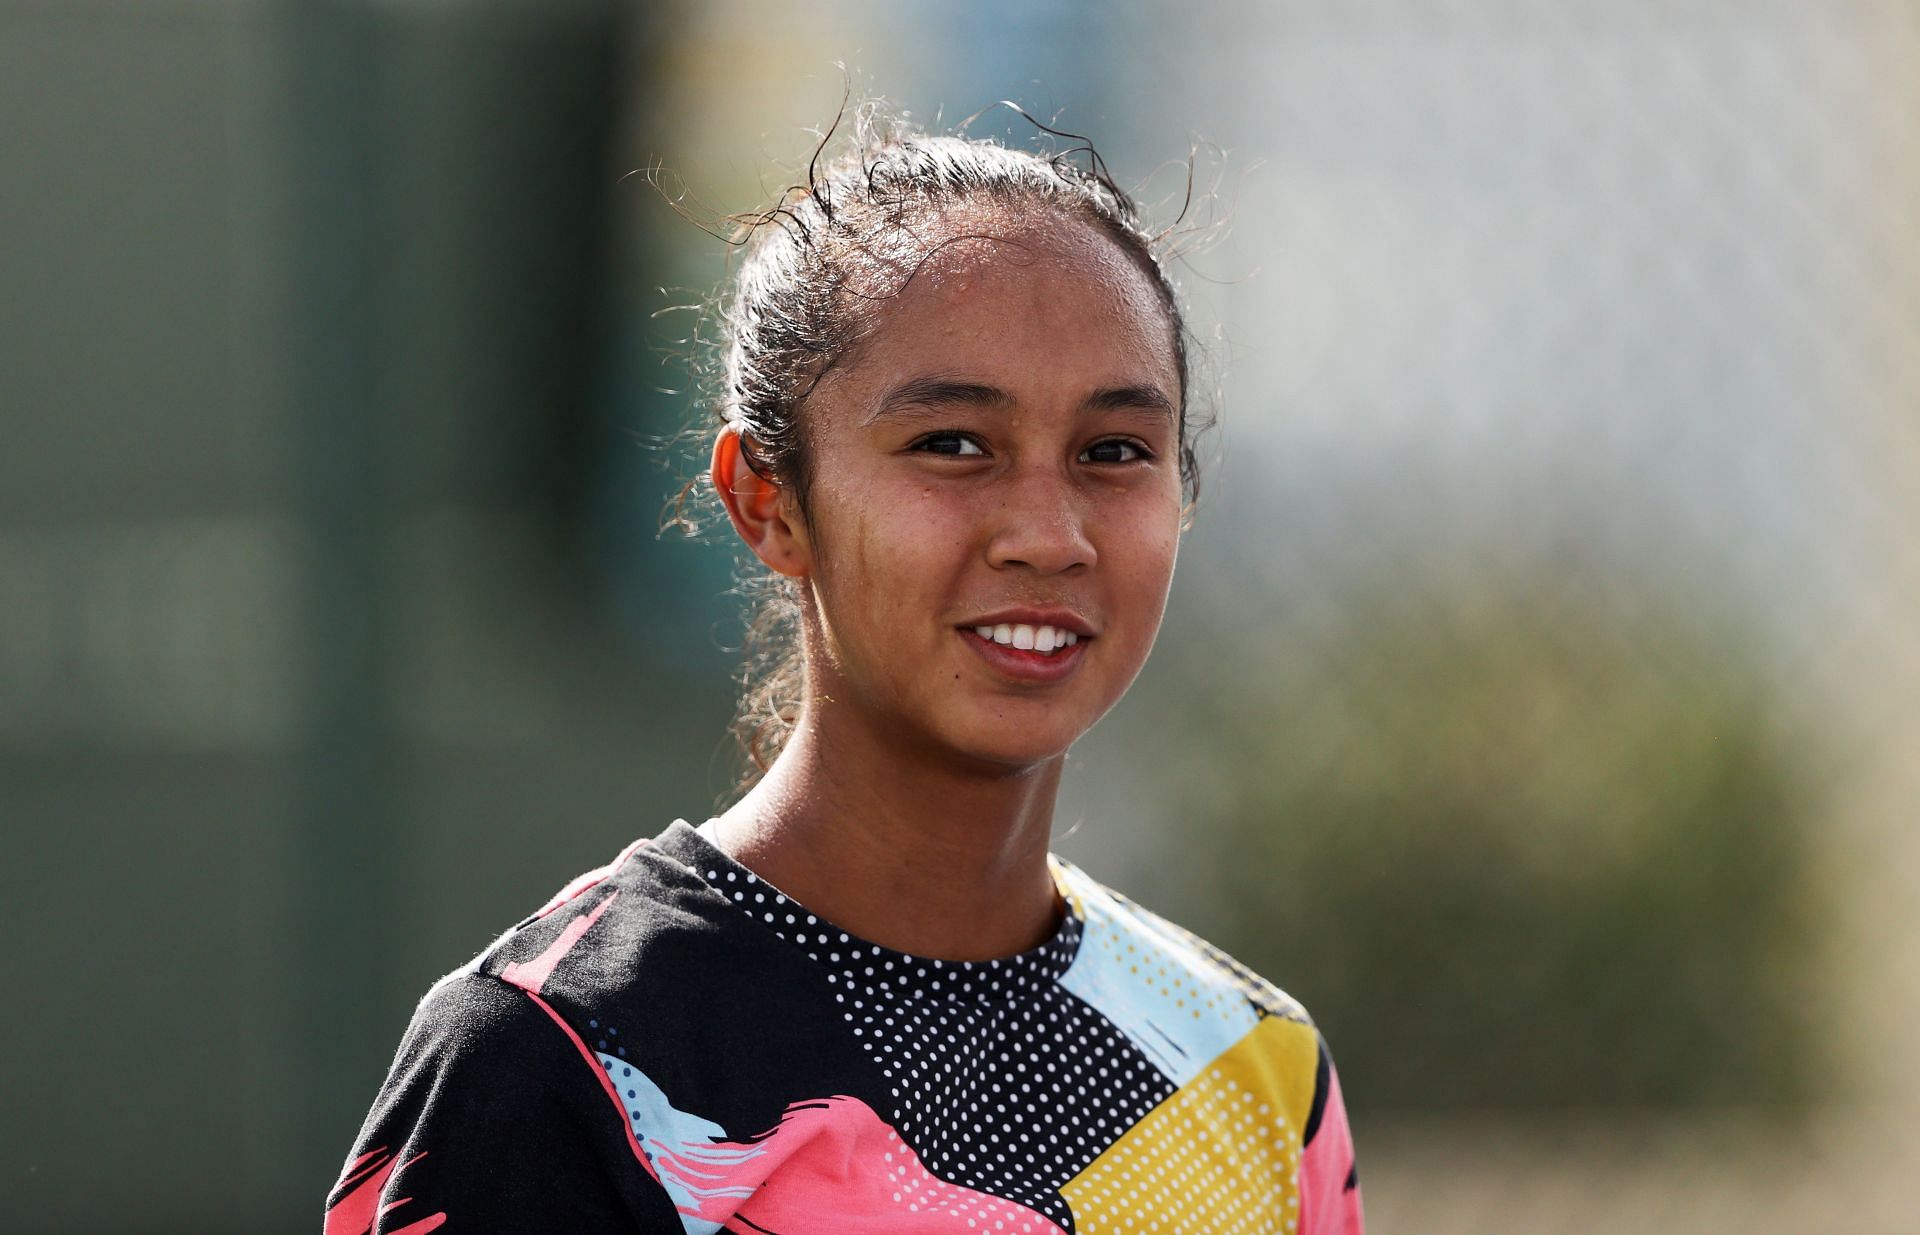 Leylah Fernandez sustained an injury at the French Open.